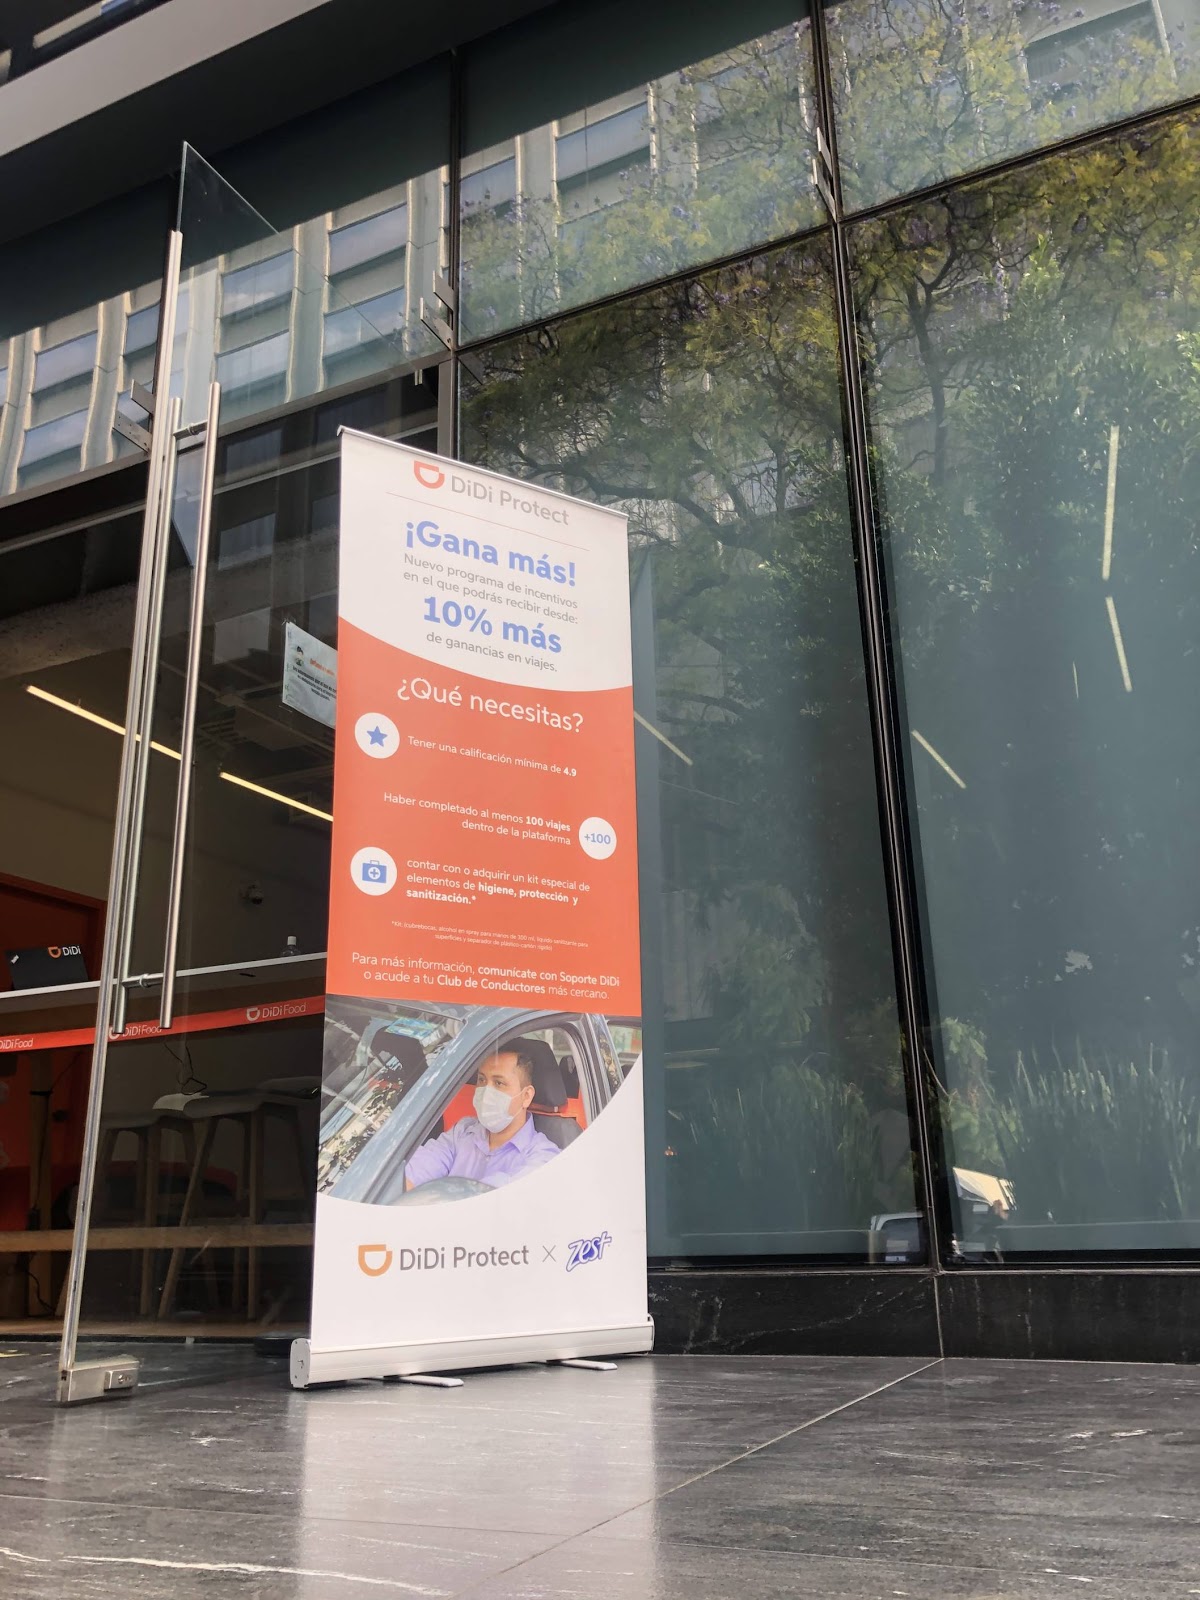 DiDi delivery worker recruitment promotion banner outside venue